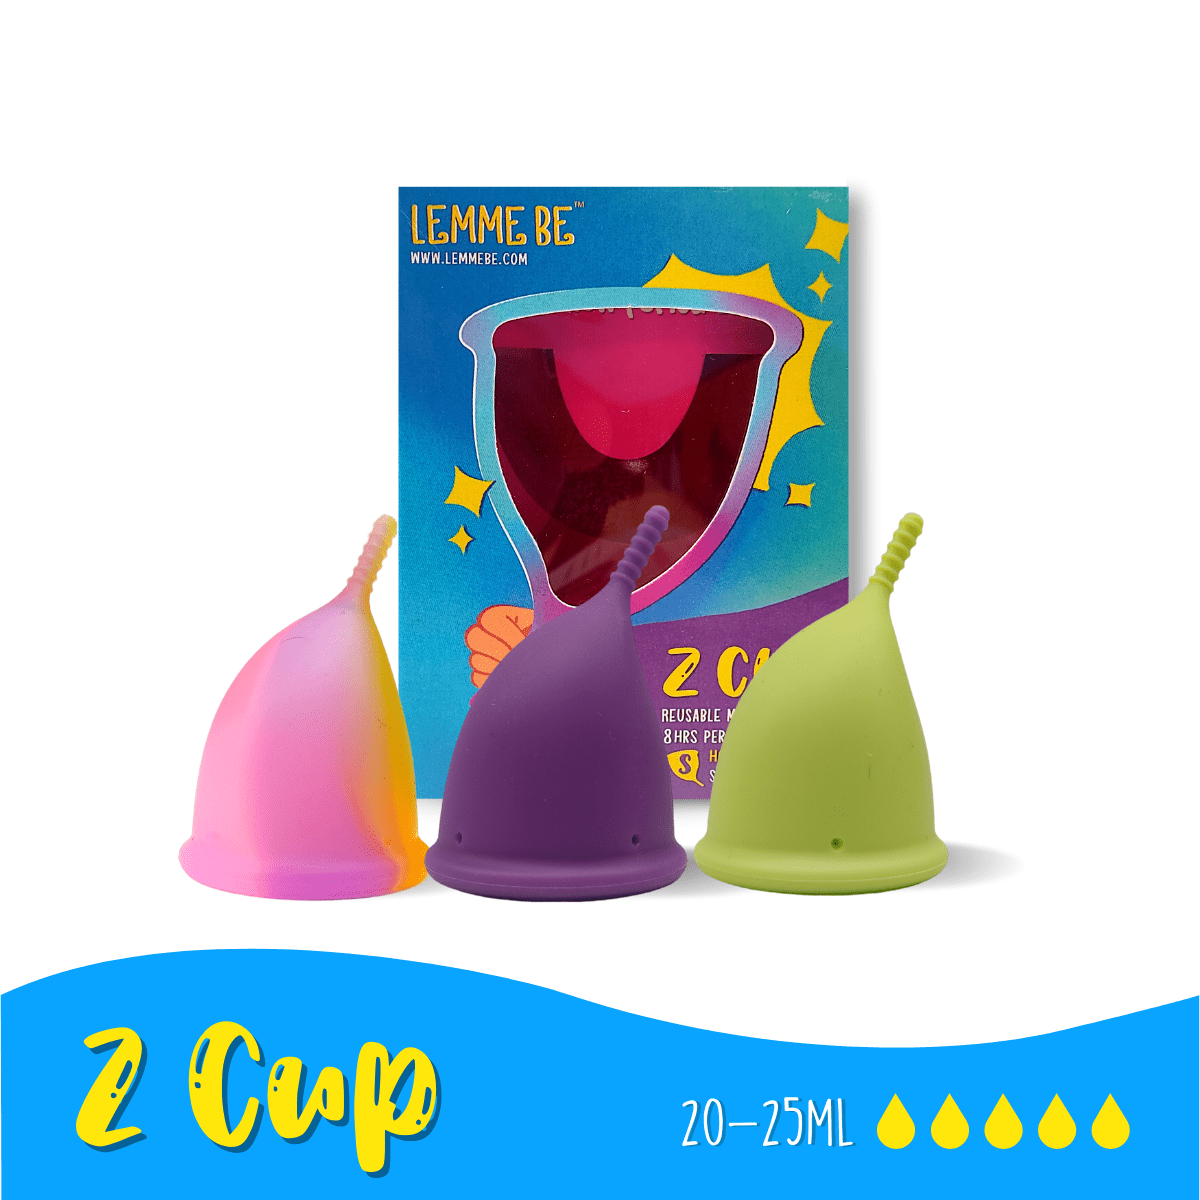 Z Cup - Reusable Menstrual Cup  100 Medical Grade Silicone  Pack of 1